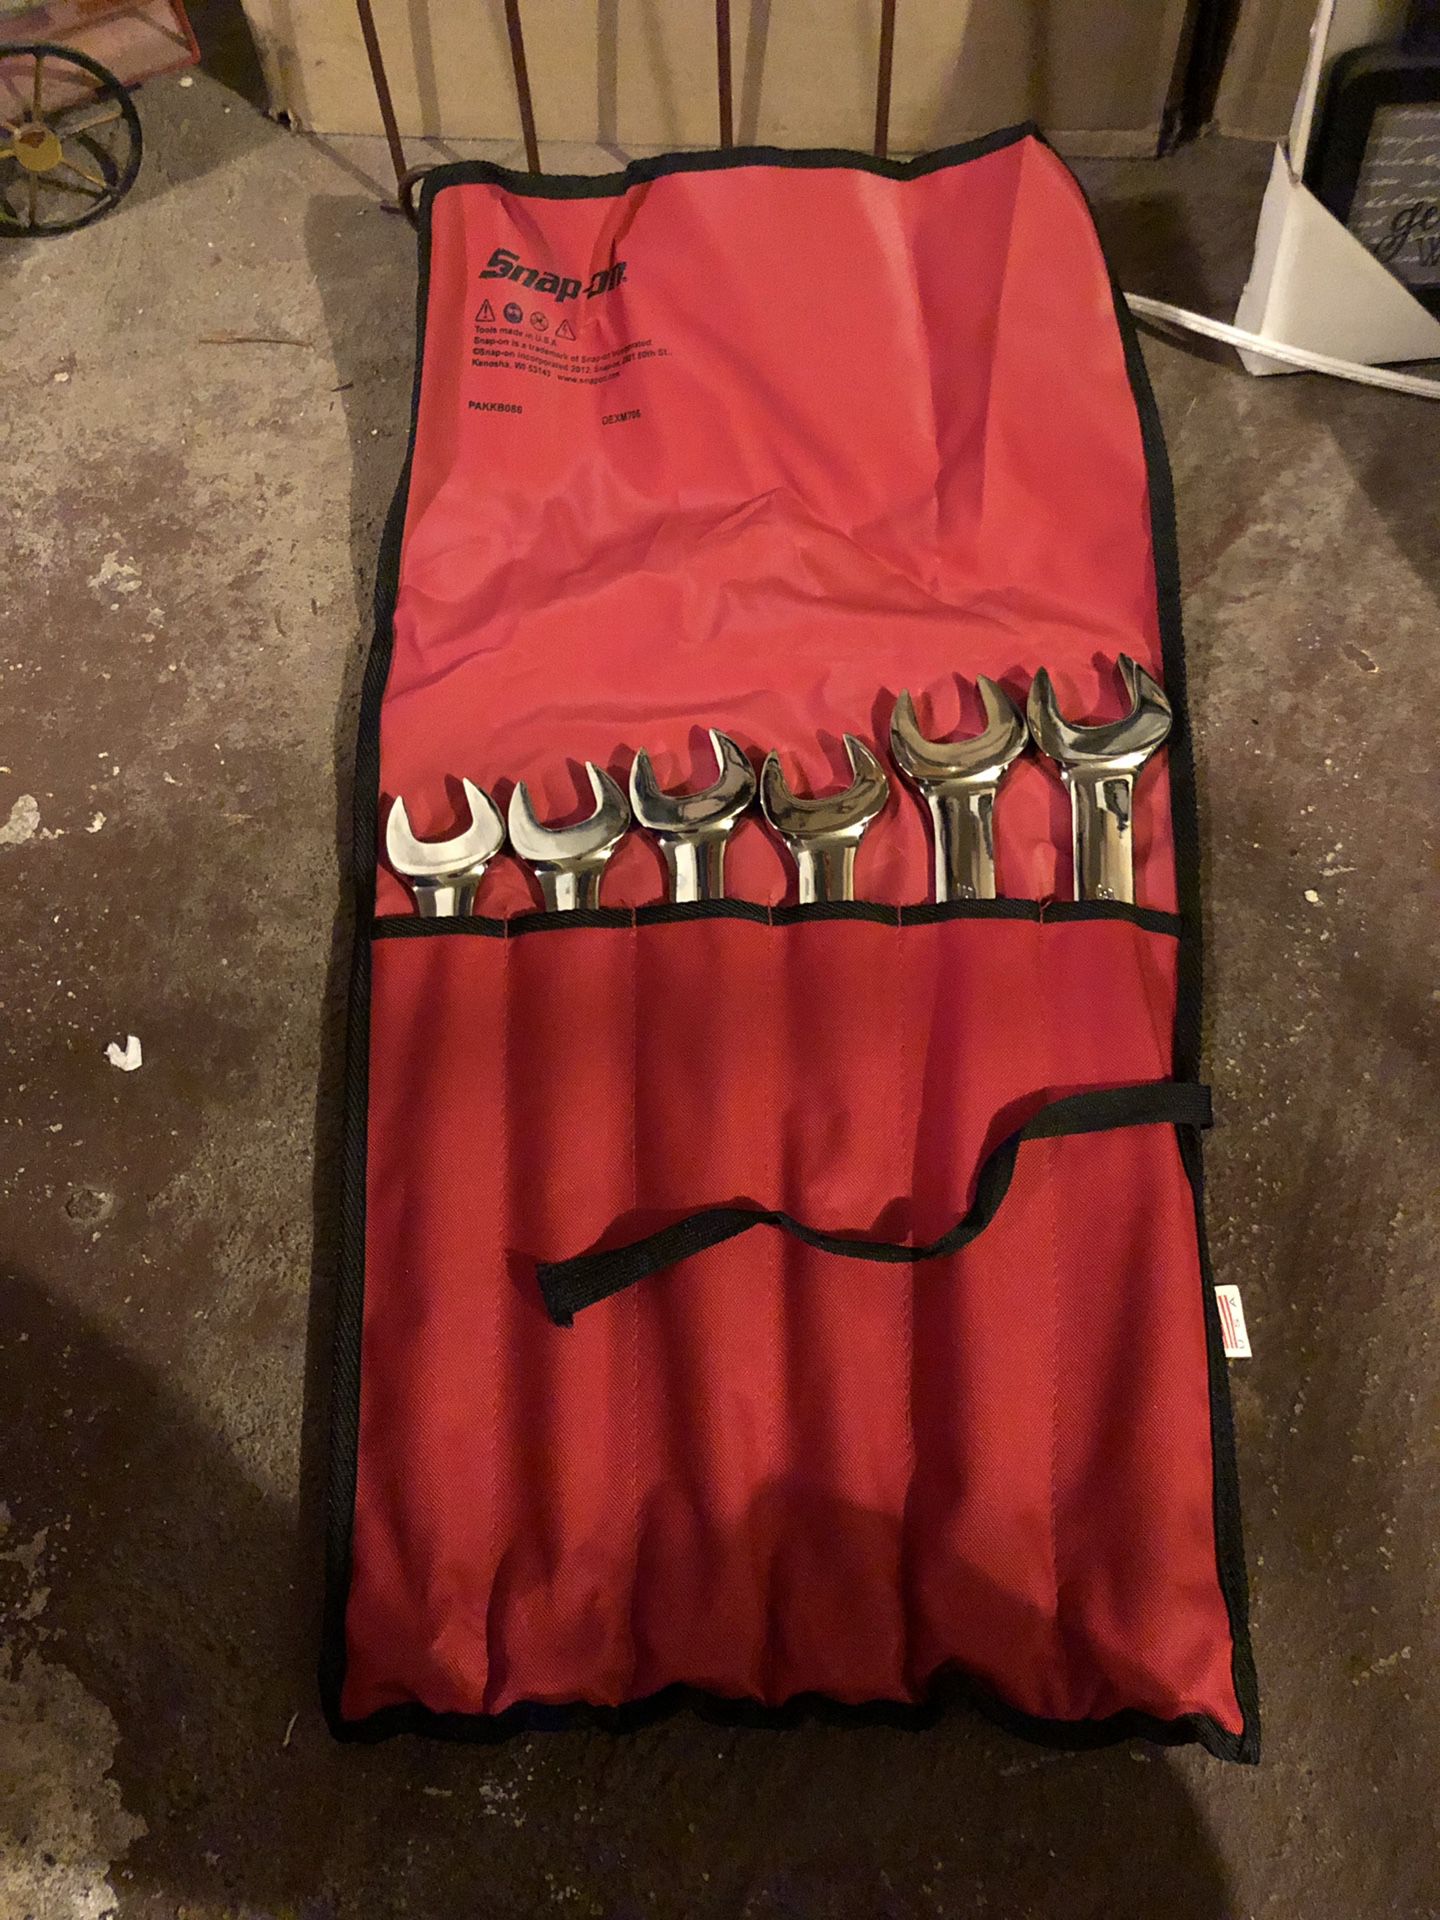 Snap On Wrenches